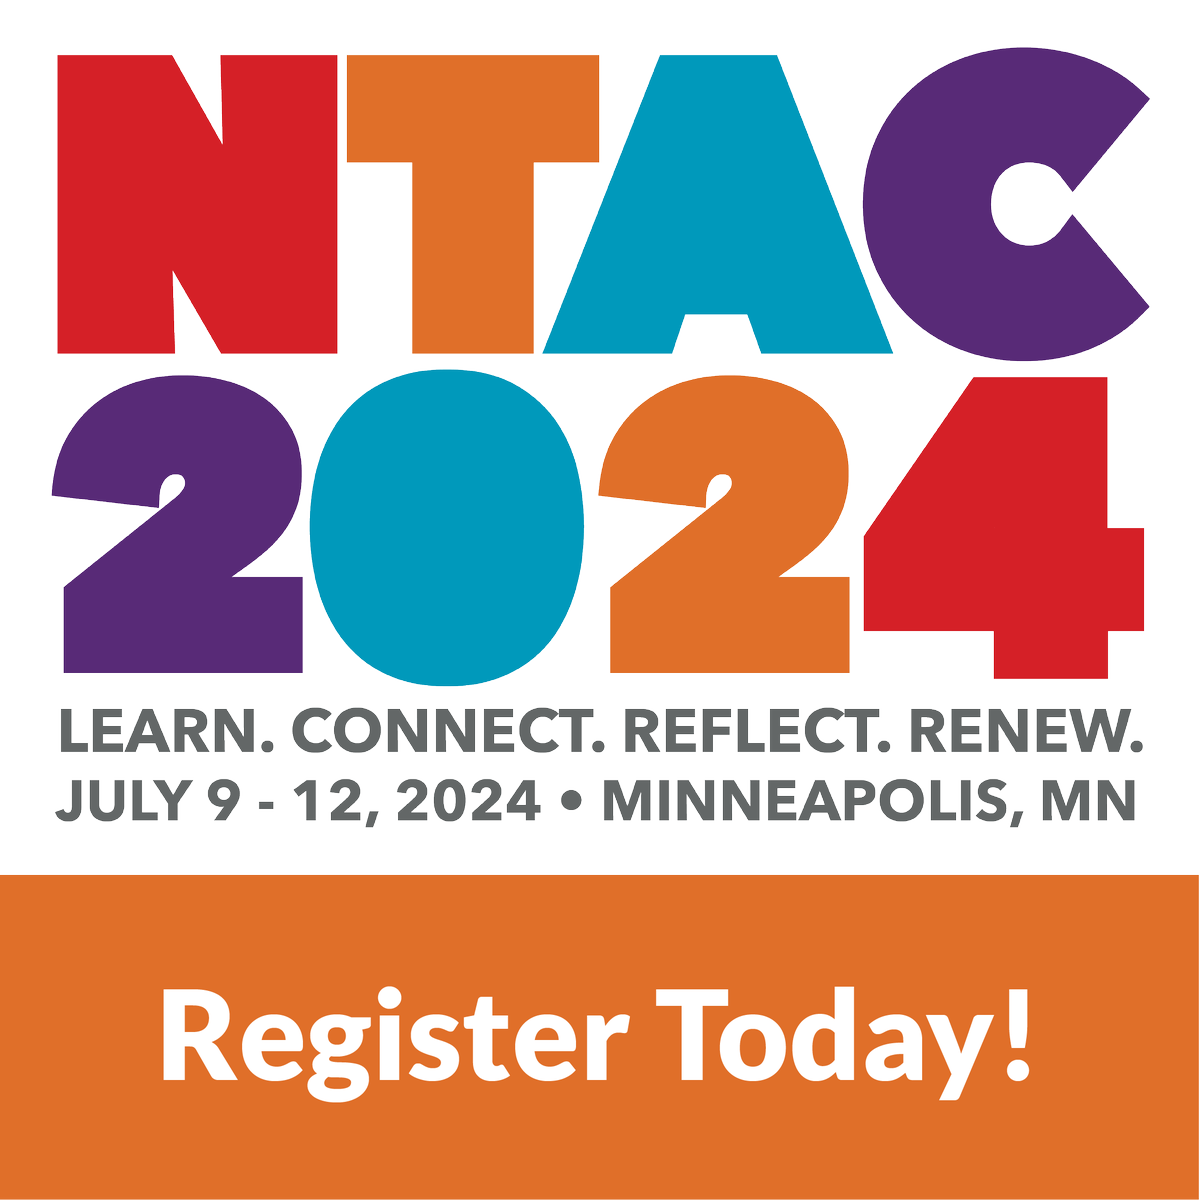 Our annual conference registration is open! Click to register: newtechnetwork.cventevents.com/event/ntac2024